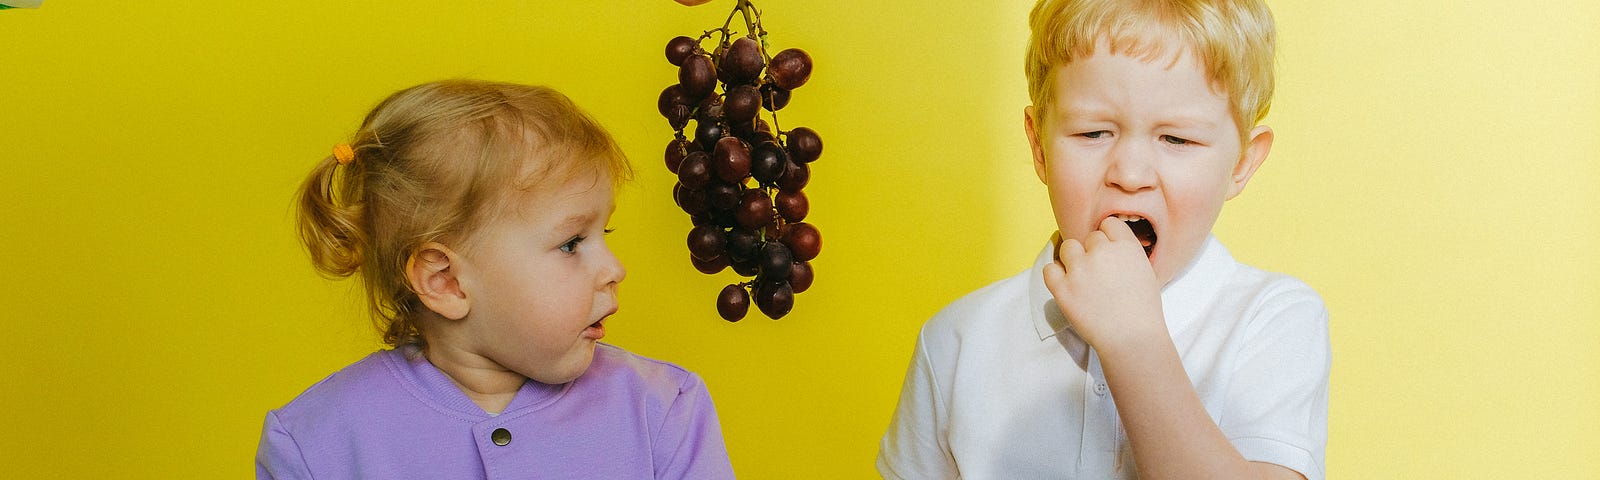 Two children. A hand from an off-camera person is offering grapes to the child on the right, but not the child on the right.